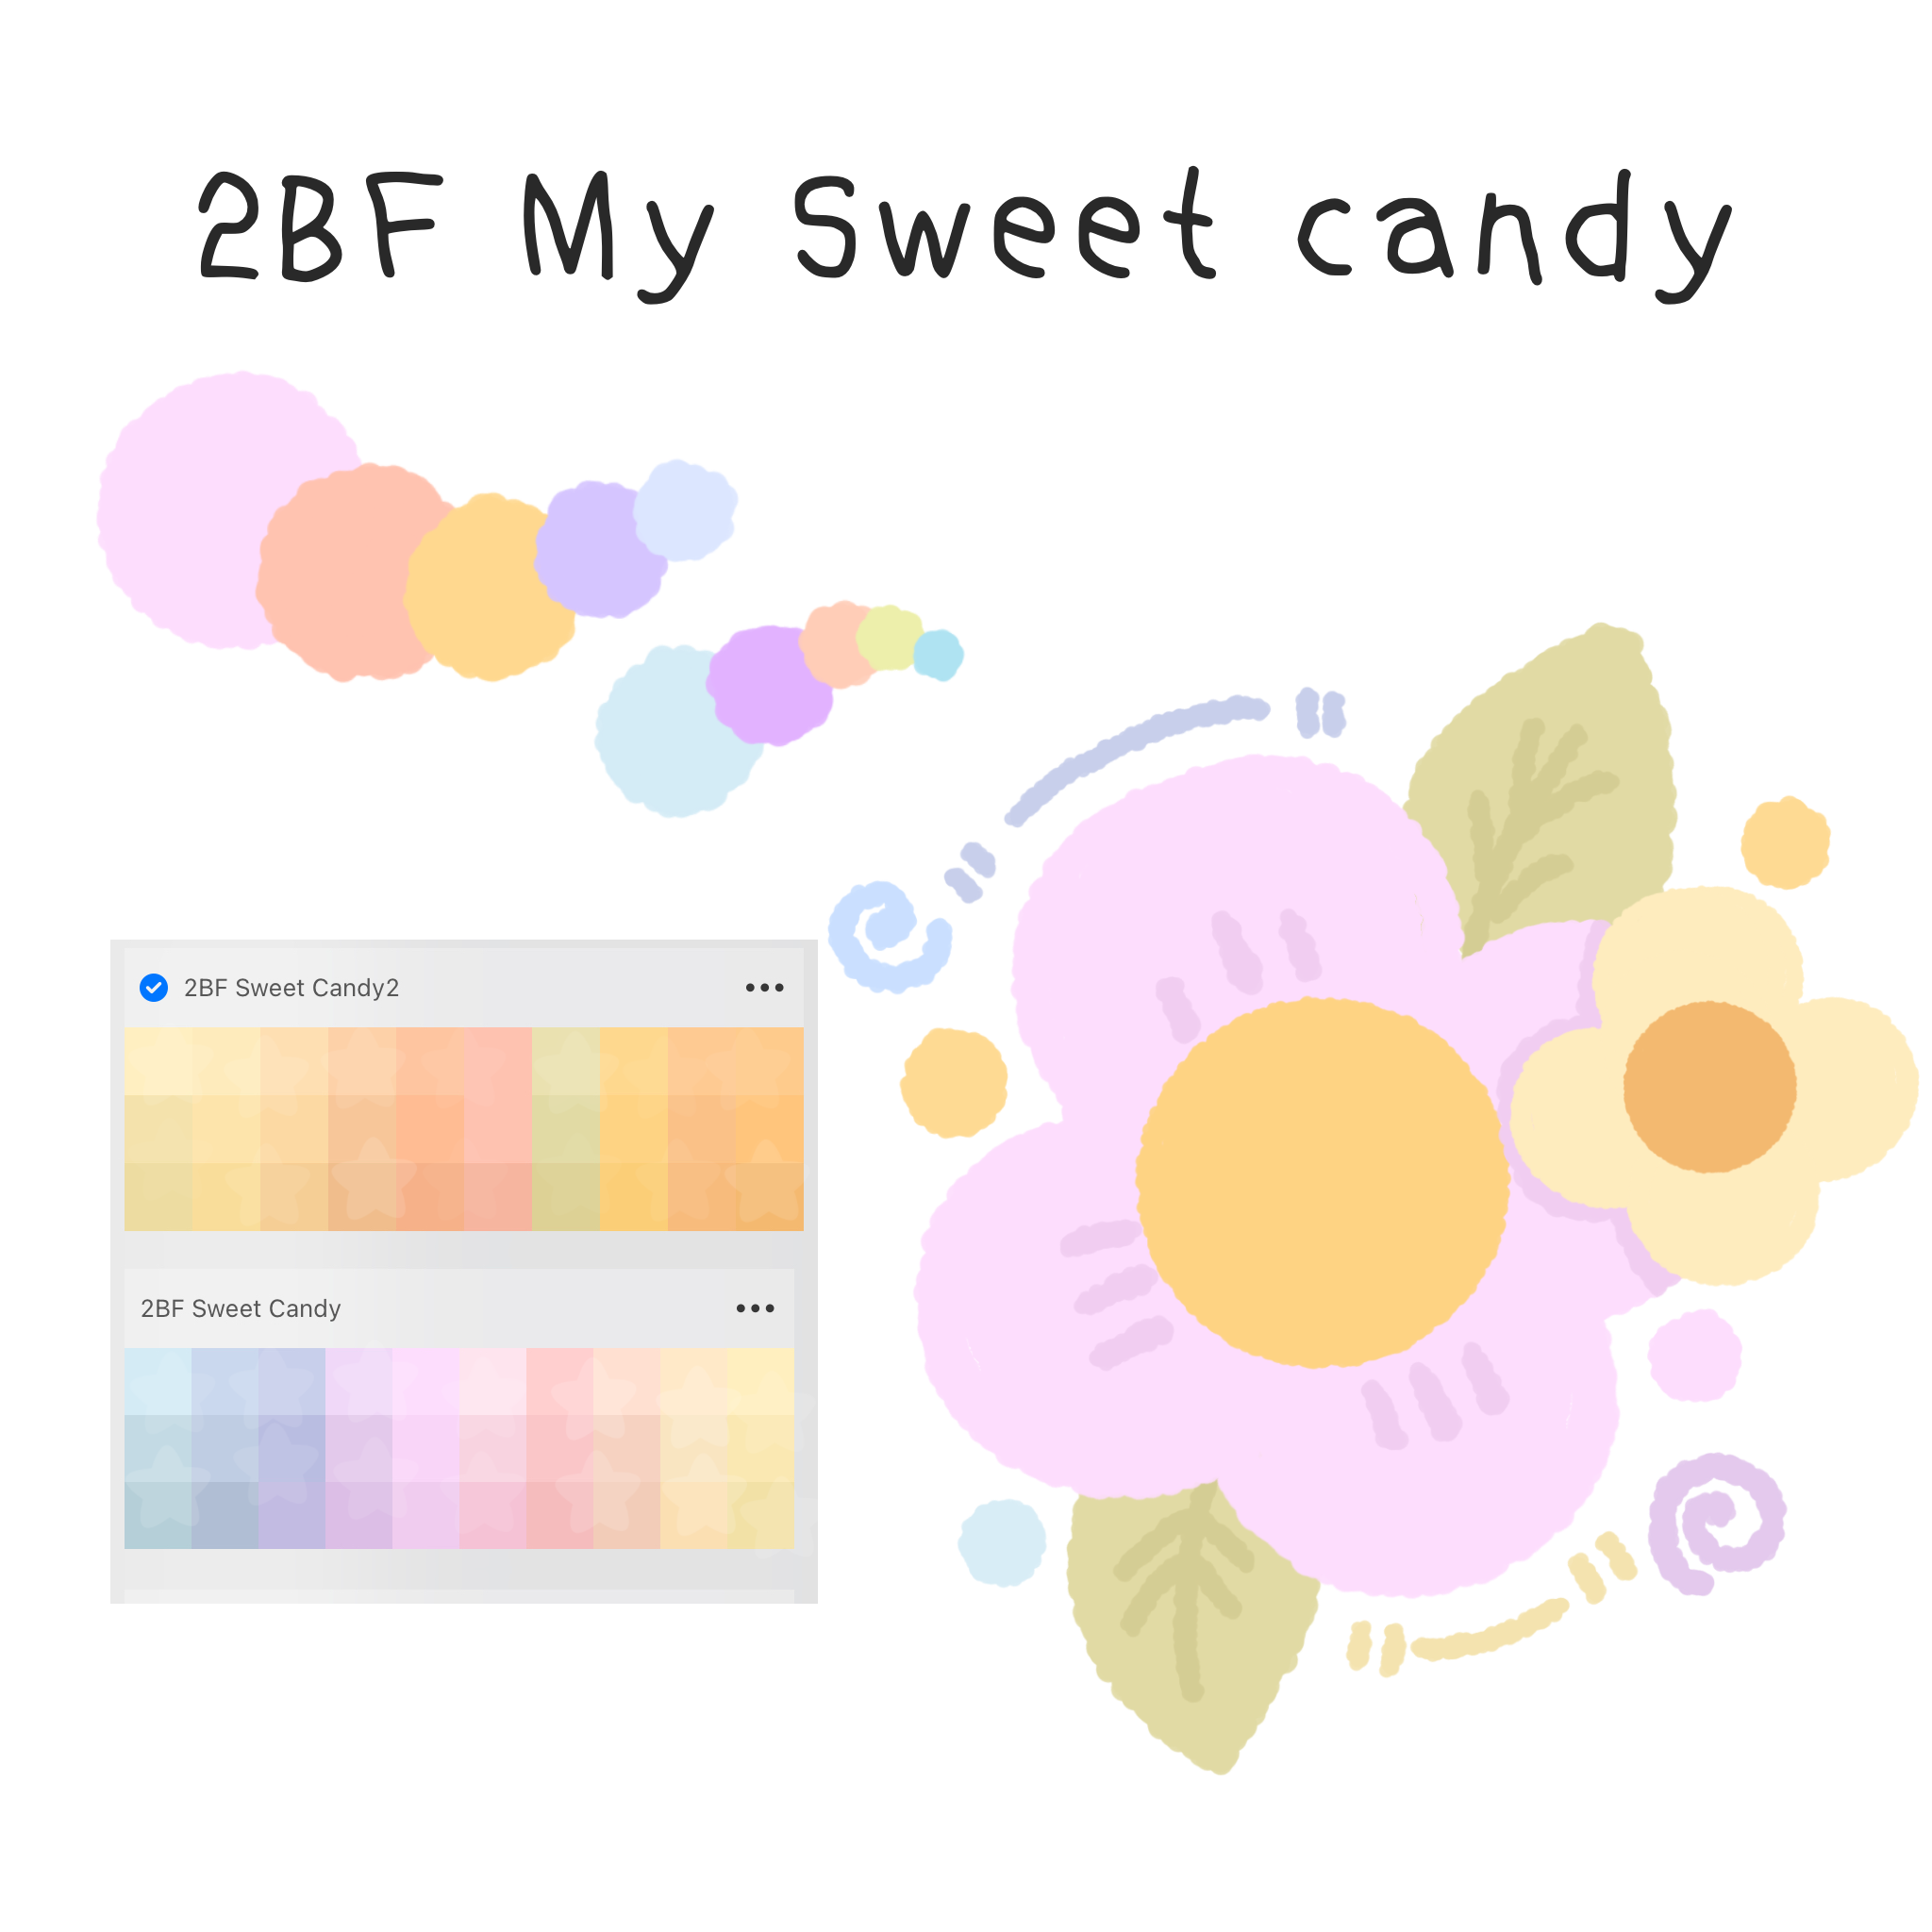 2BF Sweet Candy